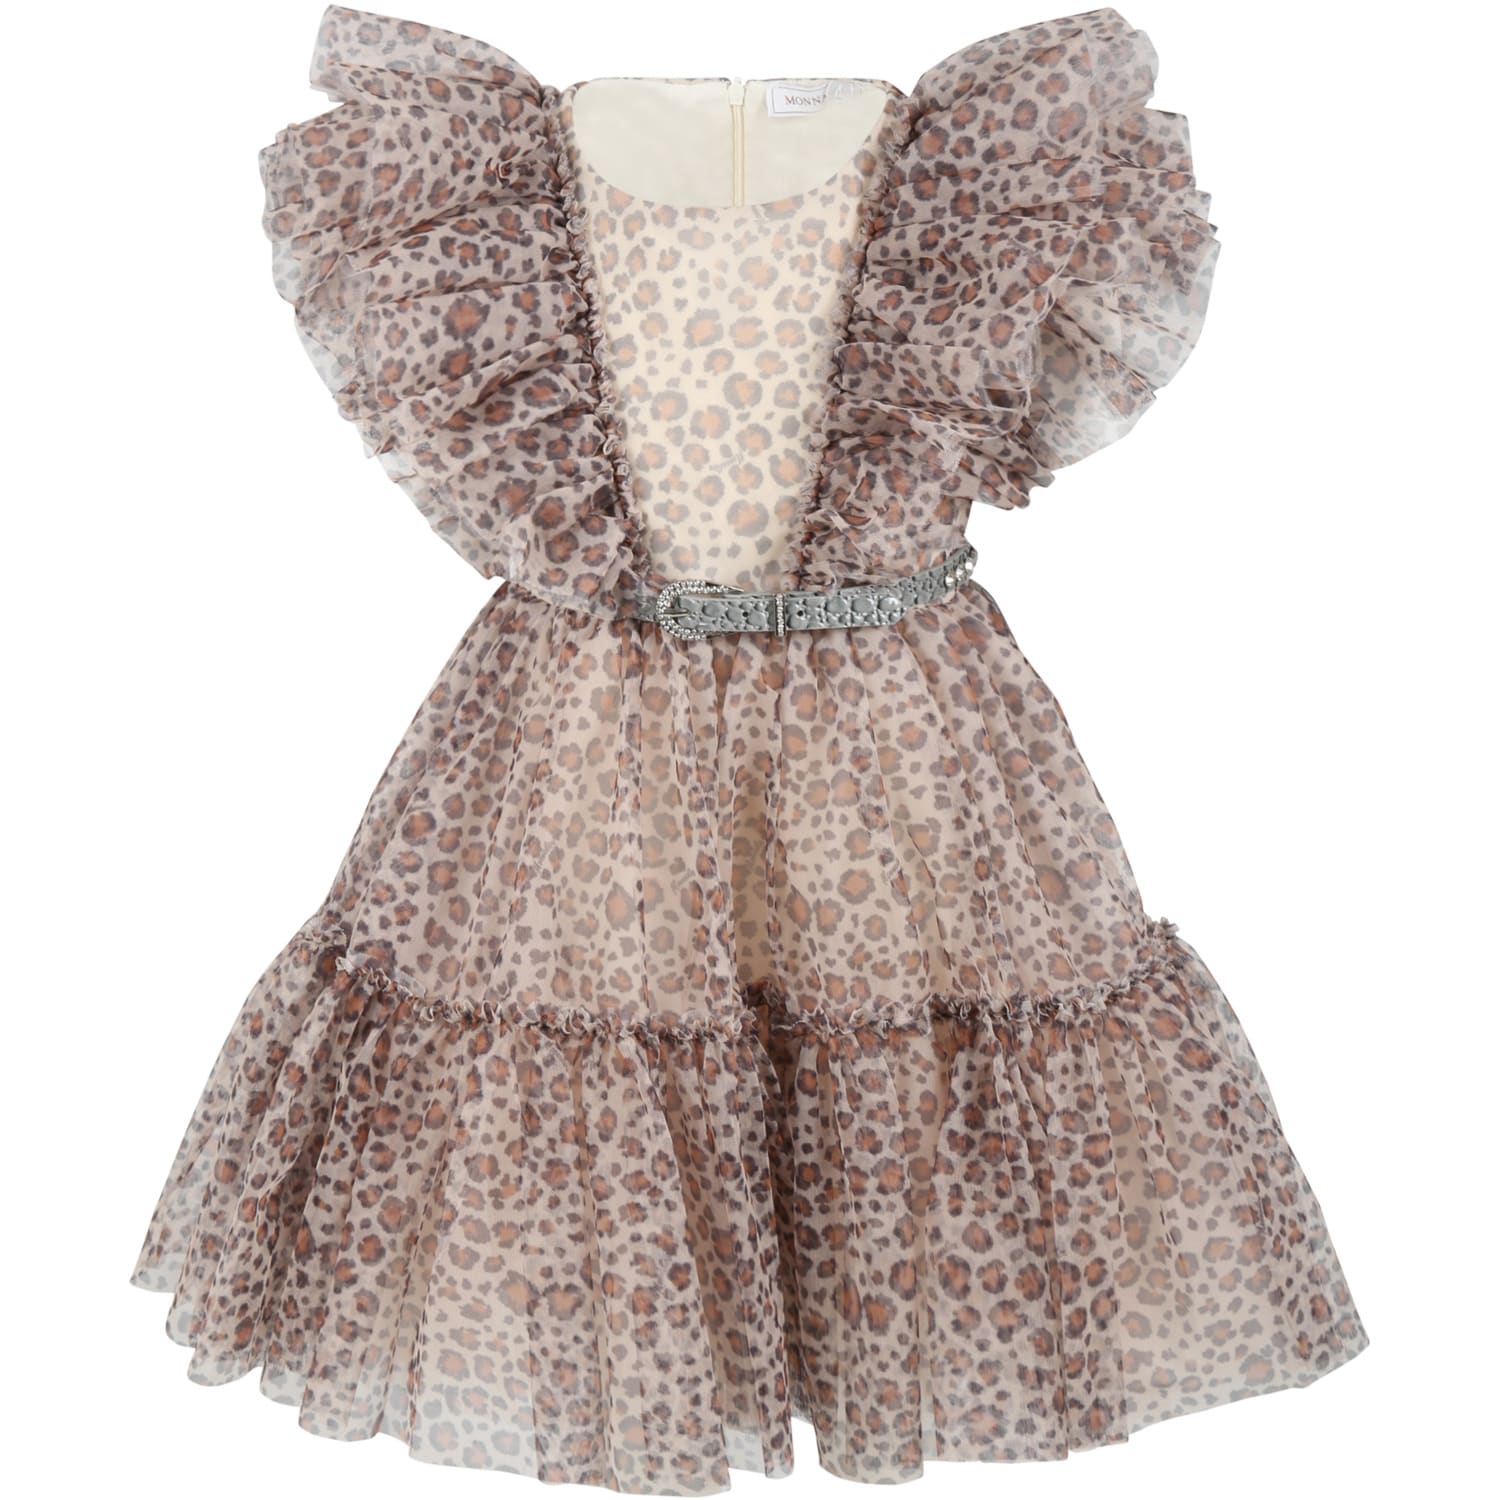 Monnalisa Beige Dress For Baby Girl With Spotted Print